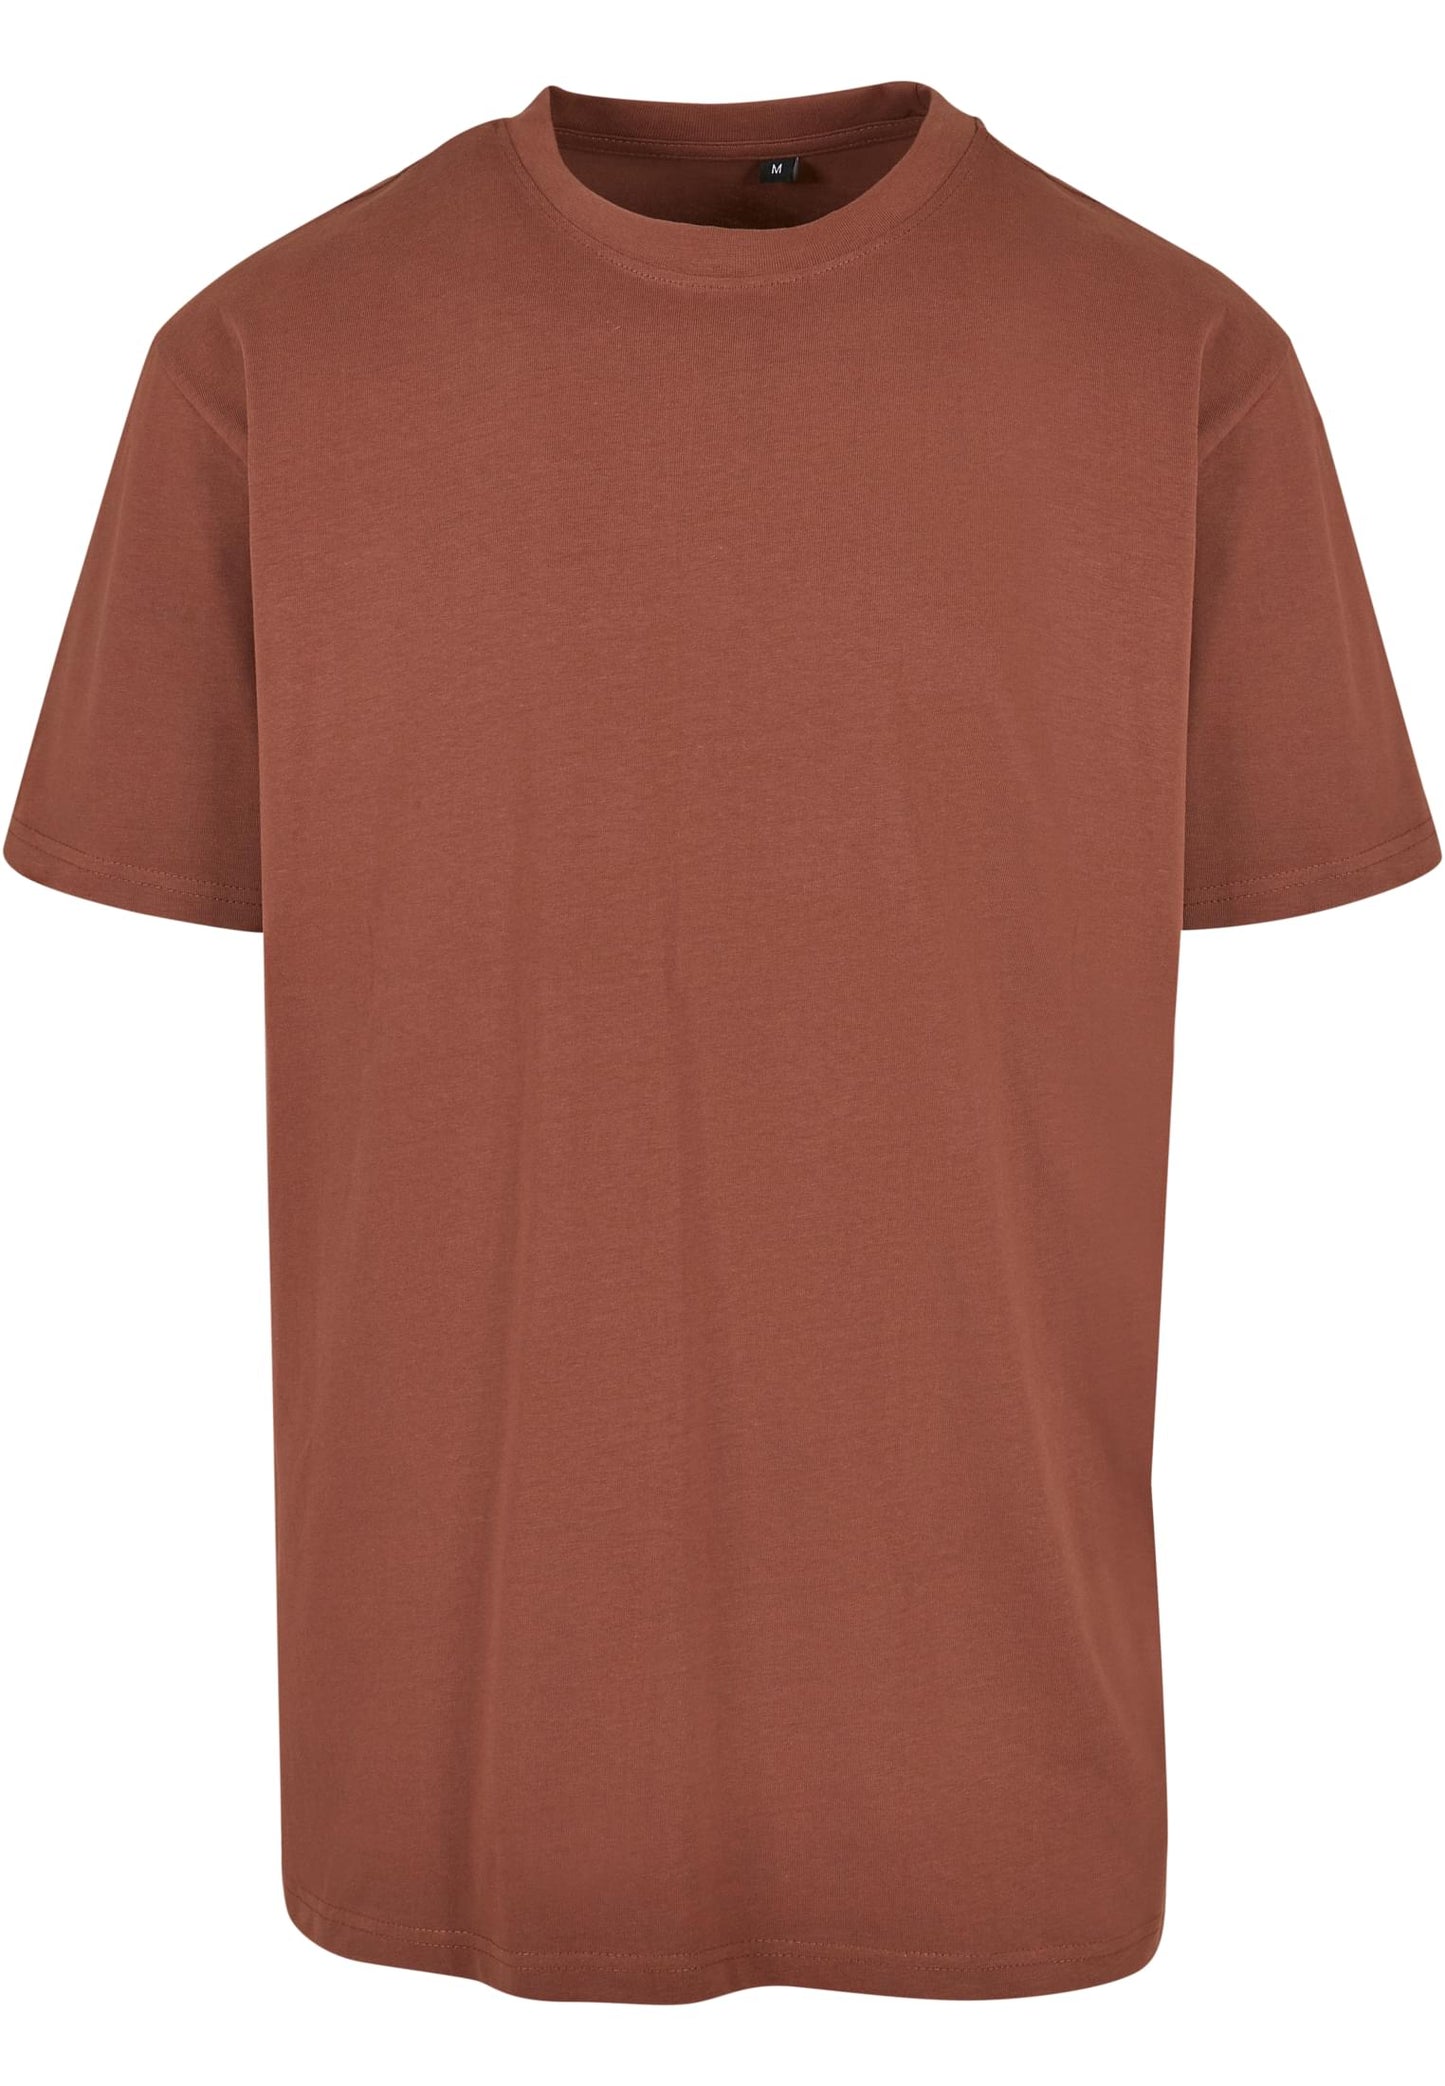 Oversize Tee - Colours